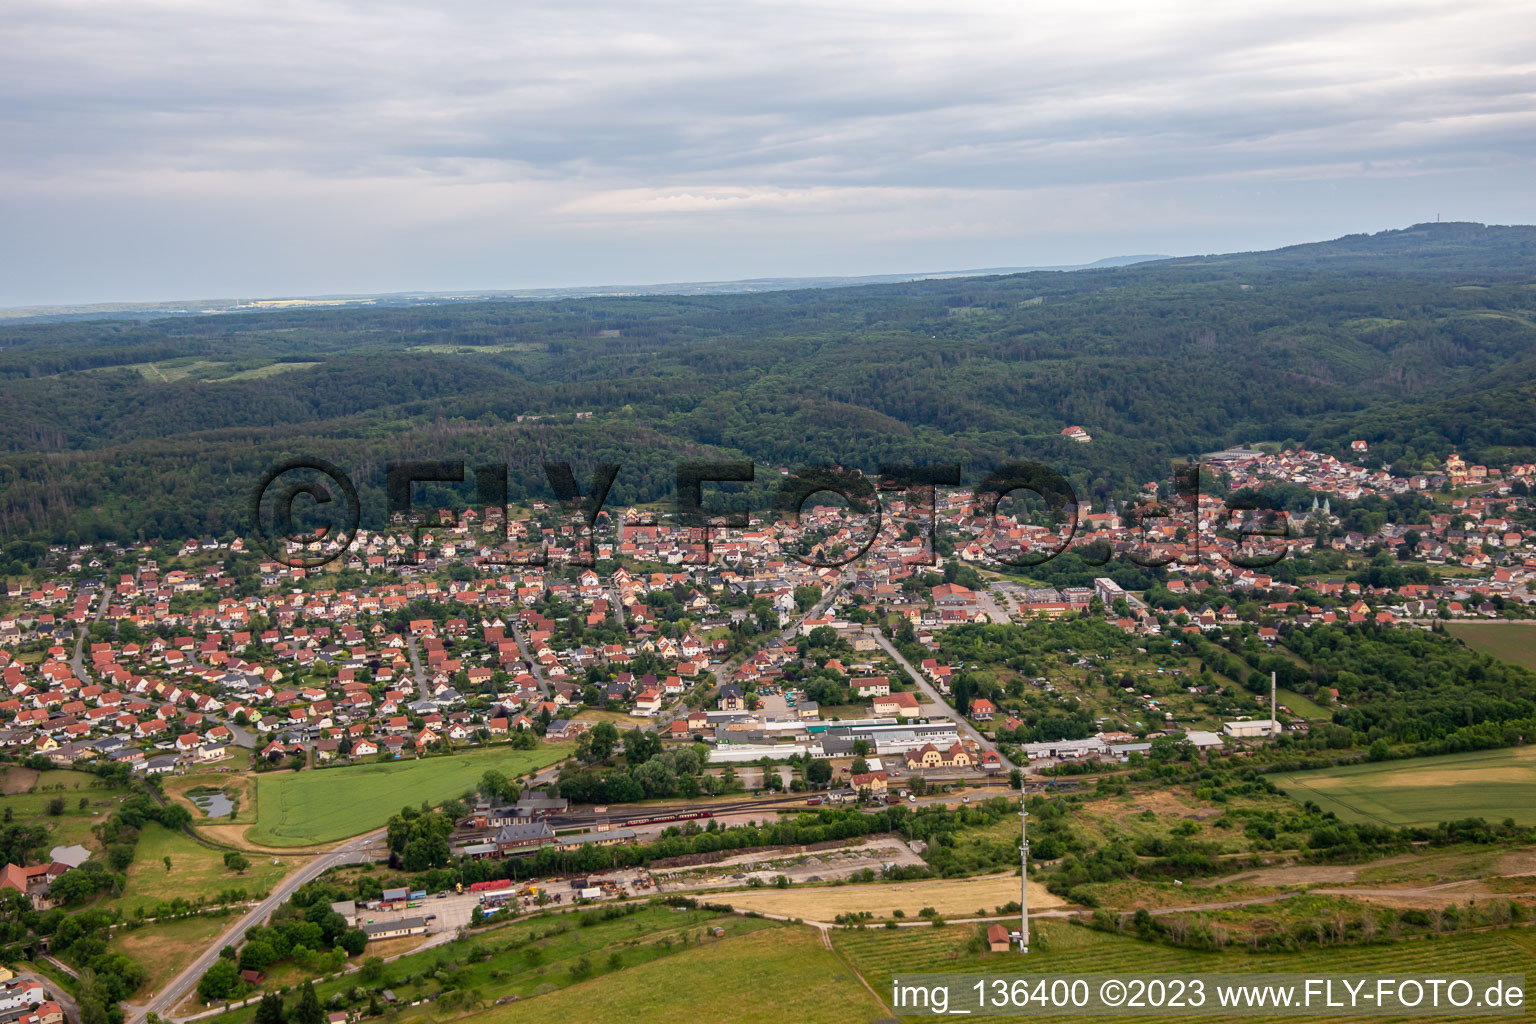 Aerial view of Station Gernrode in the district Gernrode in Quedlinburg in the state Saxony-Anhalt, Germany